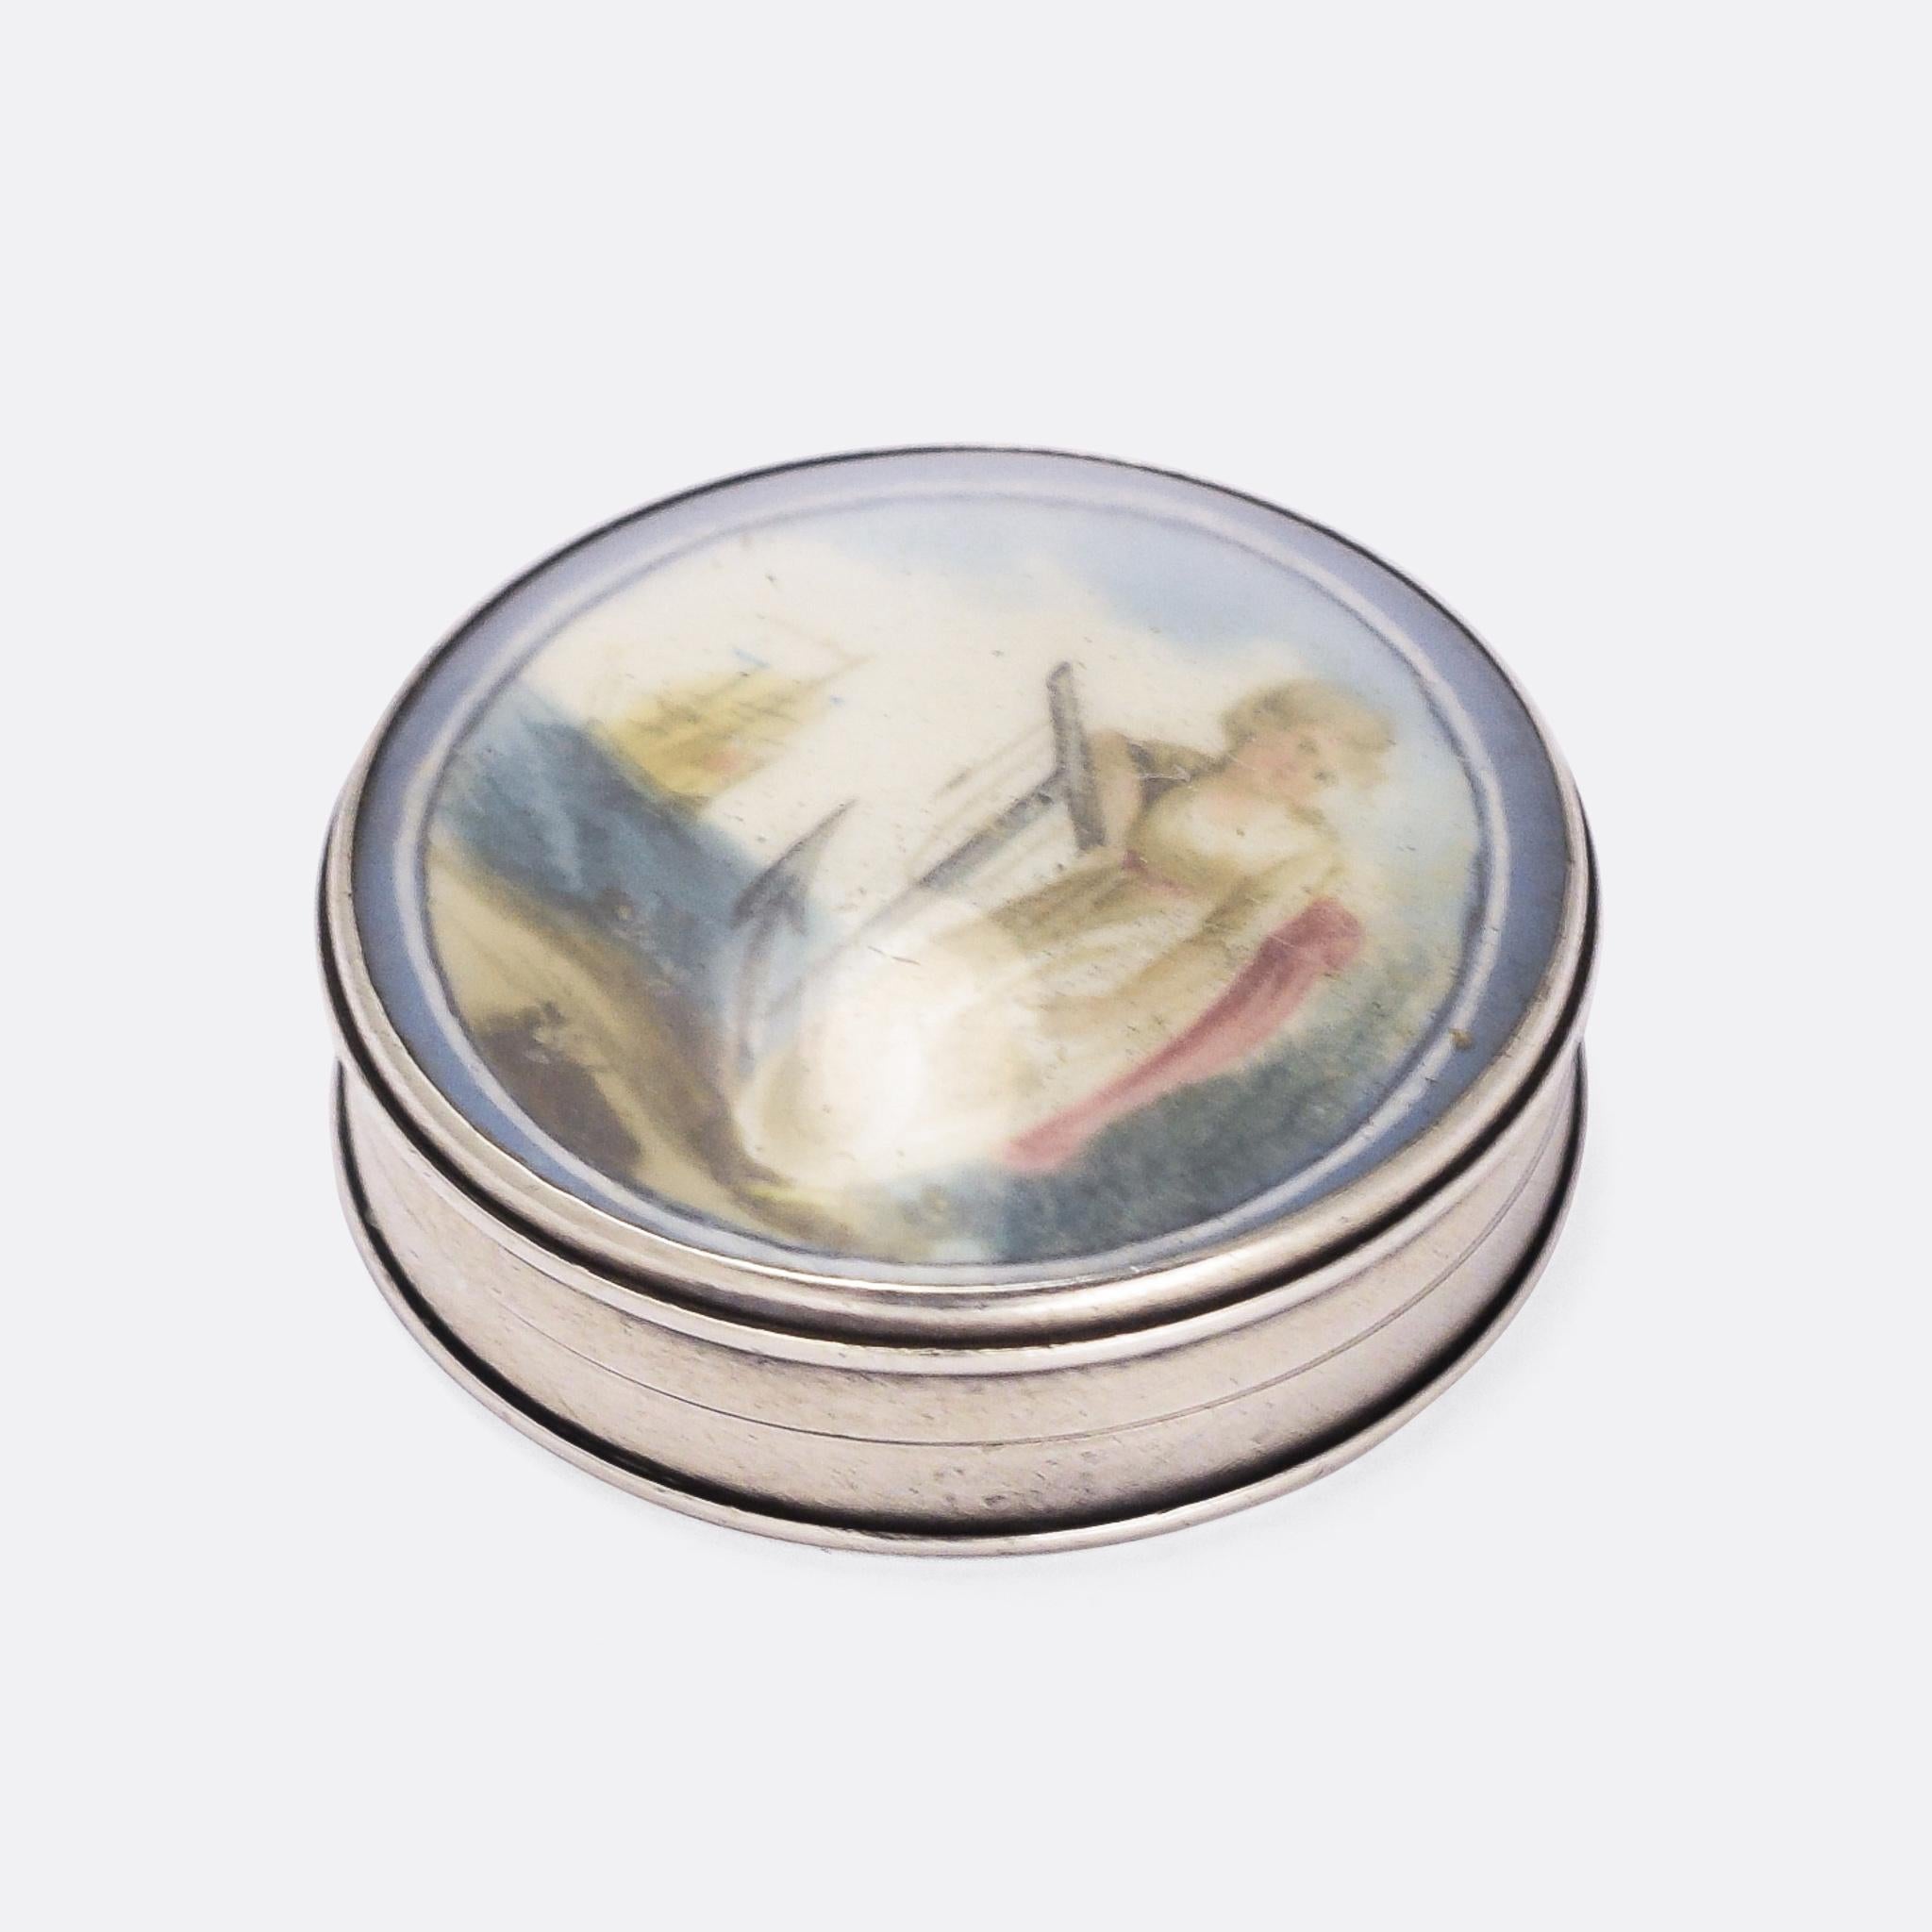 This very special little object is a patch box... dating from the late 18th Century it would have been used to store cosmetic patches, worn on the skin to cover blemishes. It's likely French origin, crafted in silver, with a beautiful miniature